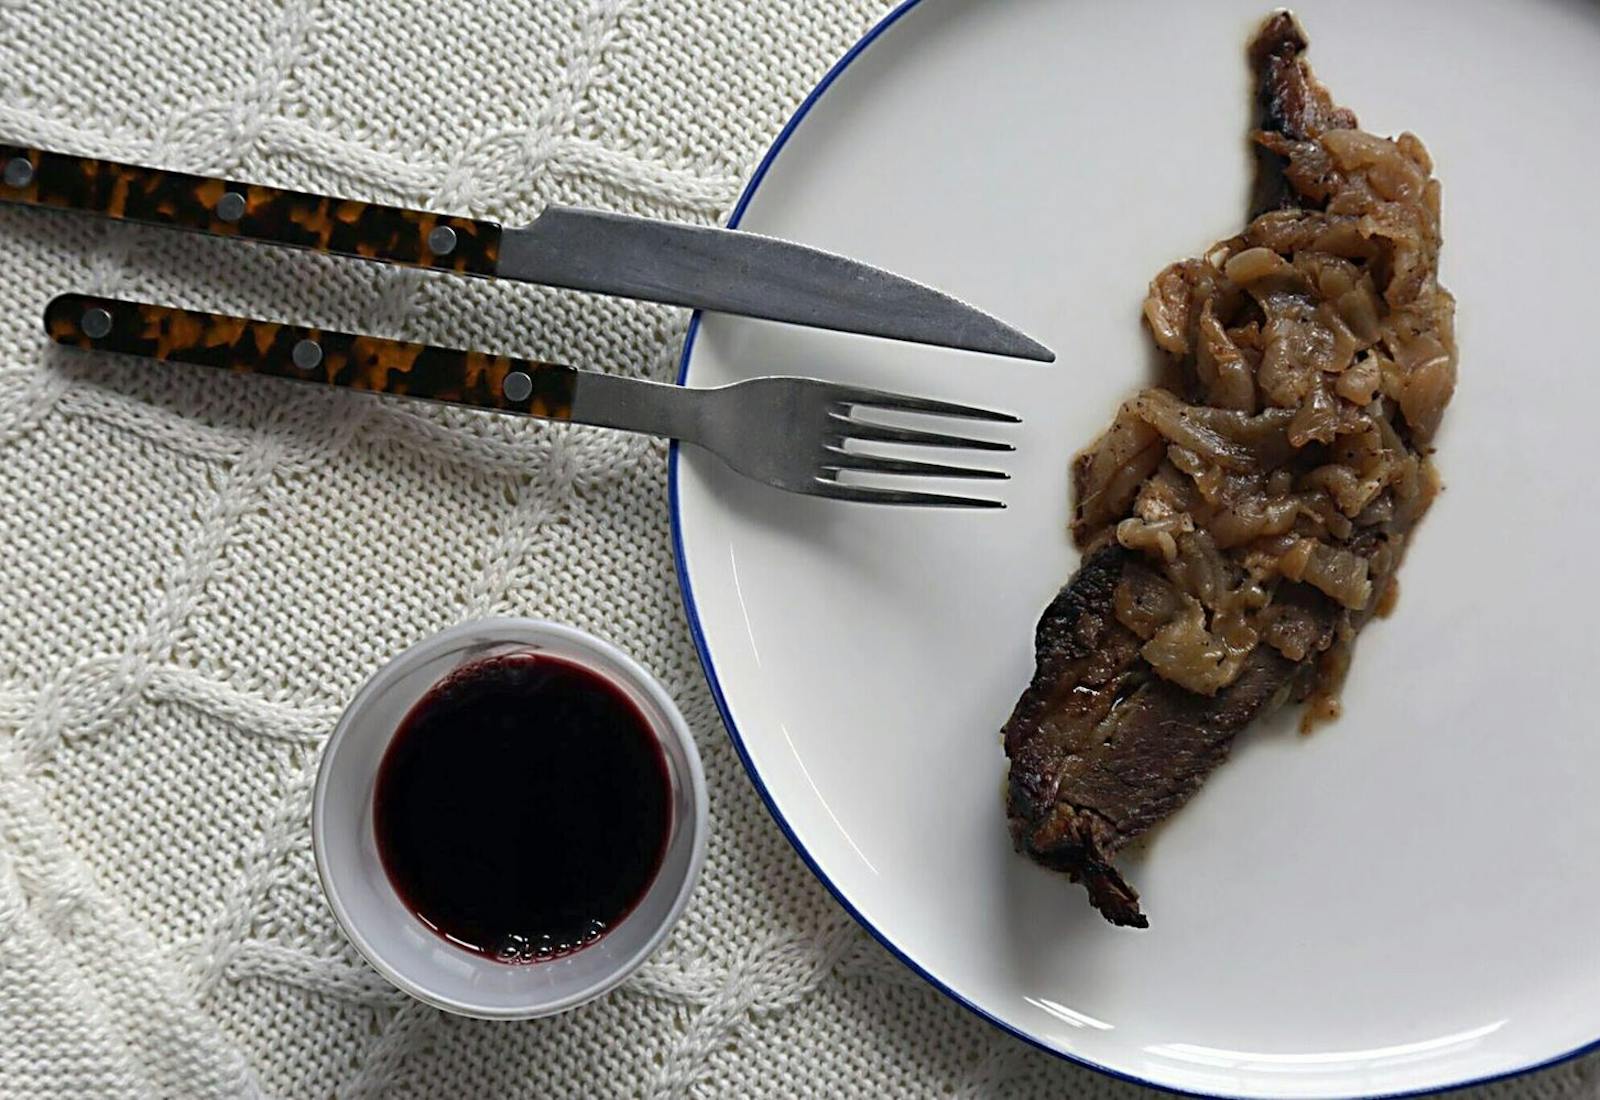 Slice of brisket with onions on white plate alongside cup of red wine atop white woven tablecloth.